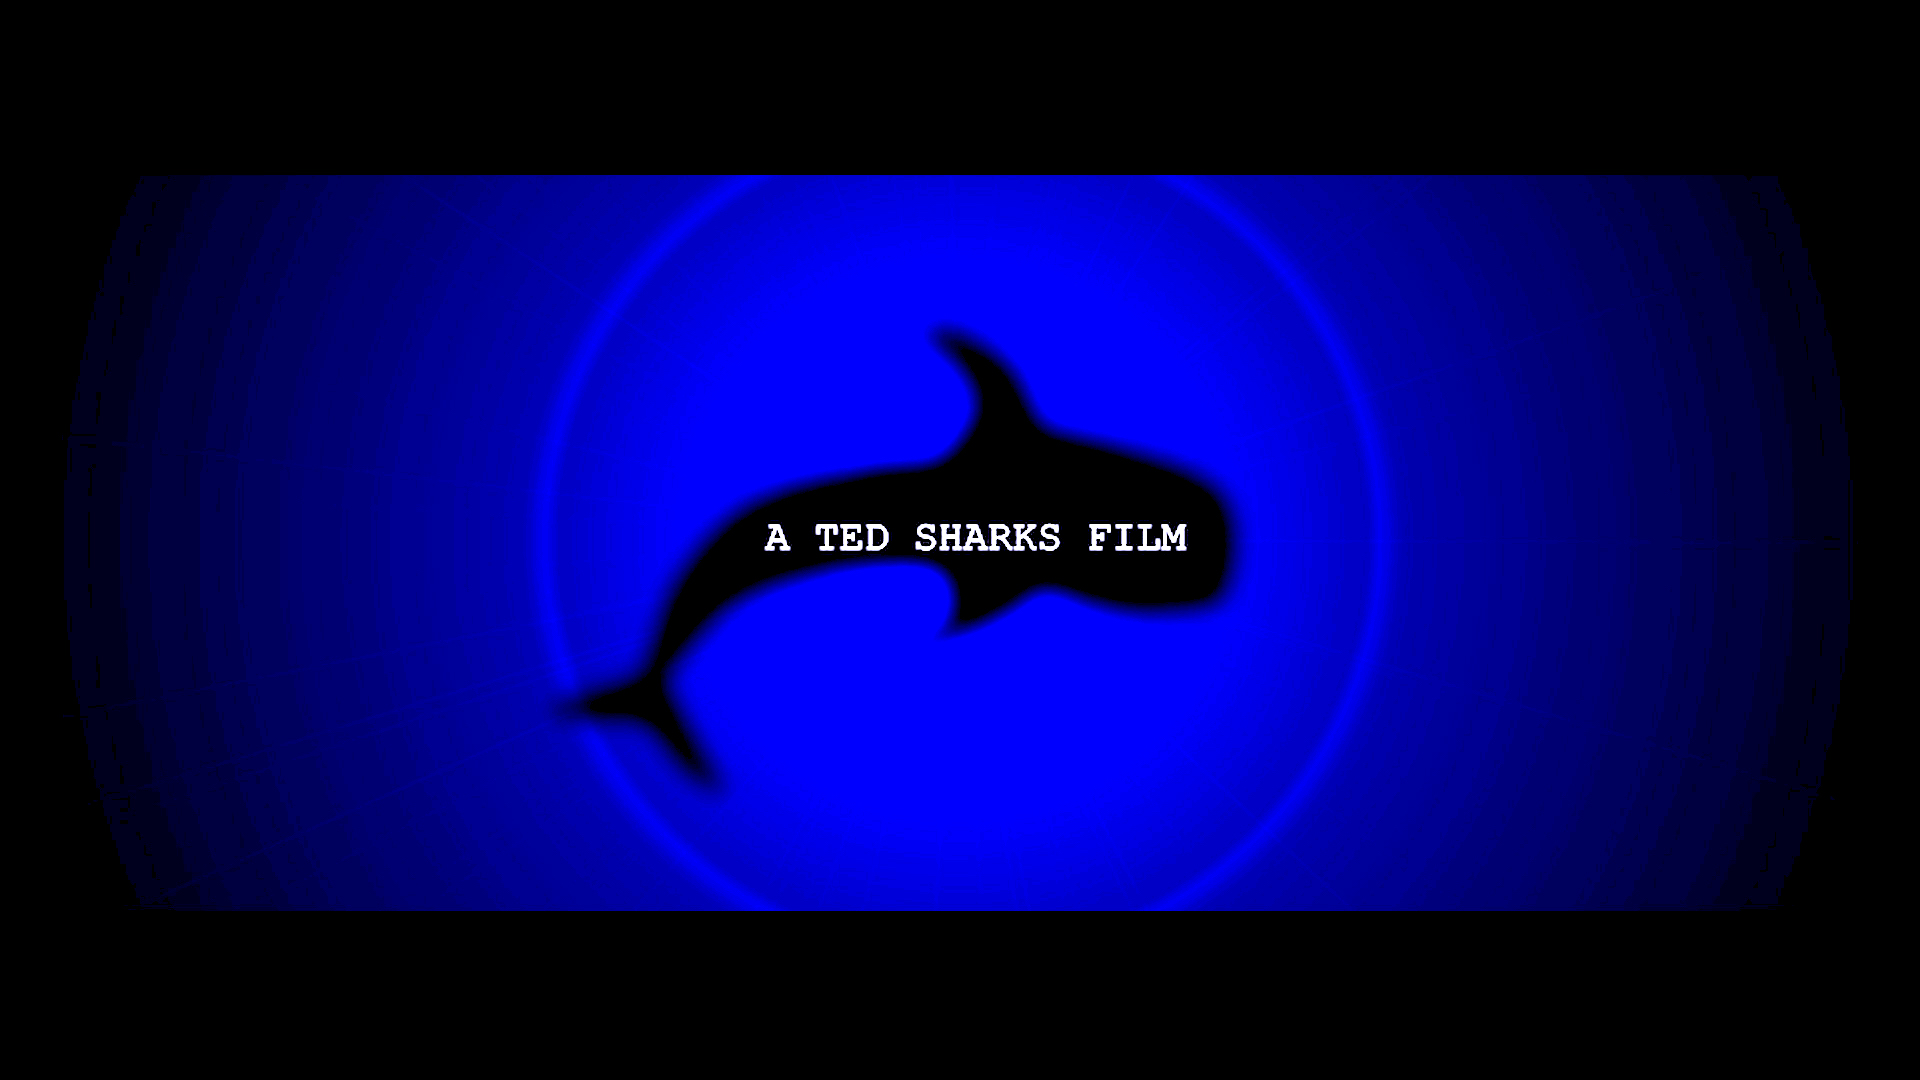 Ted Sharks